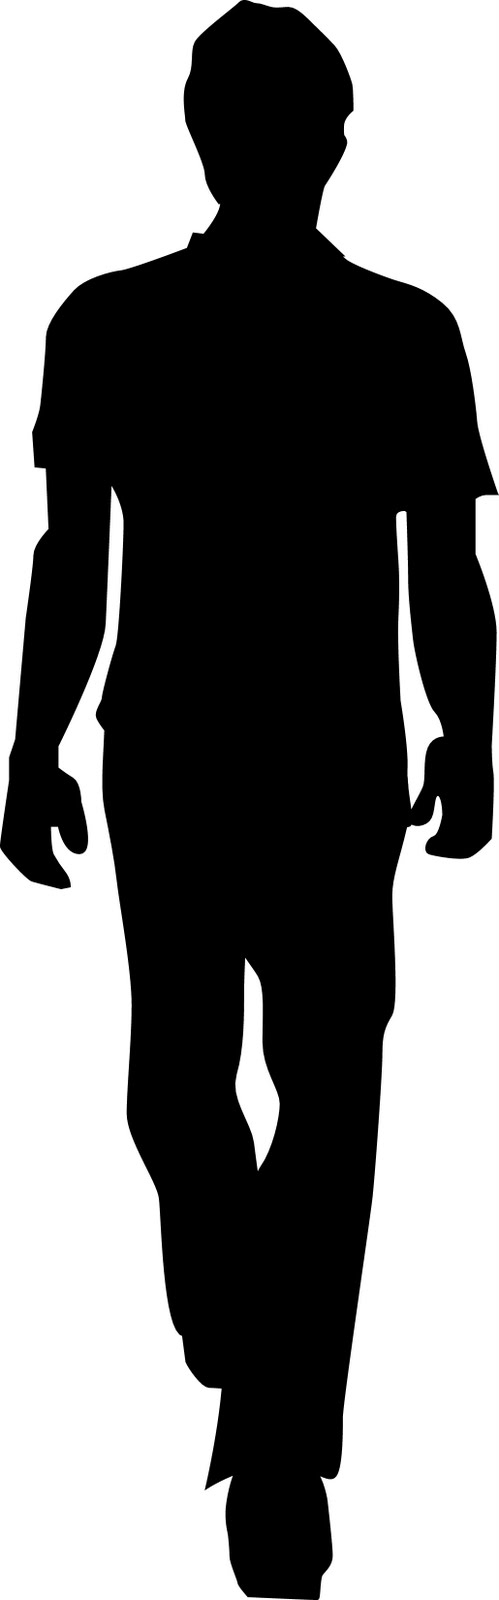 10 Walking Person Silhouette   Free Cliparts That You Can Download To